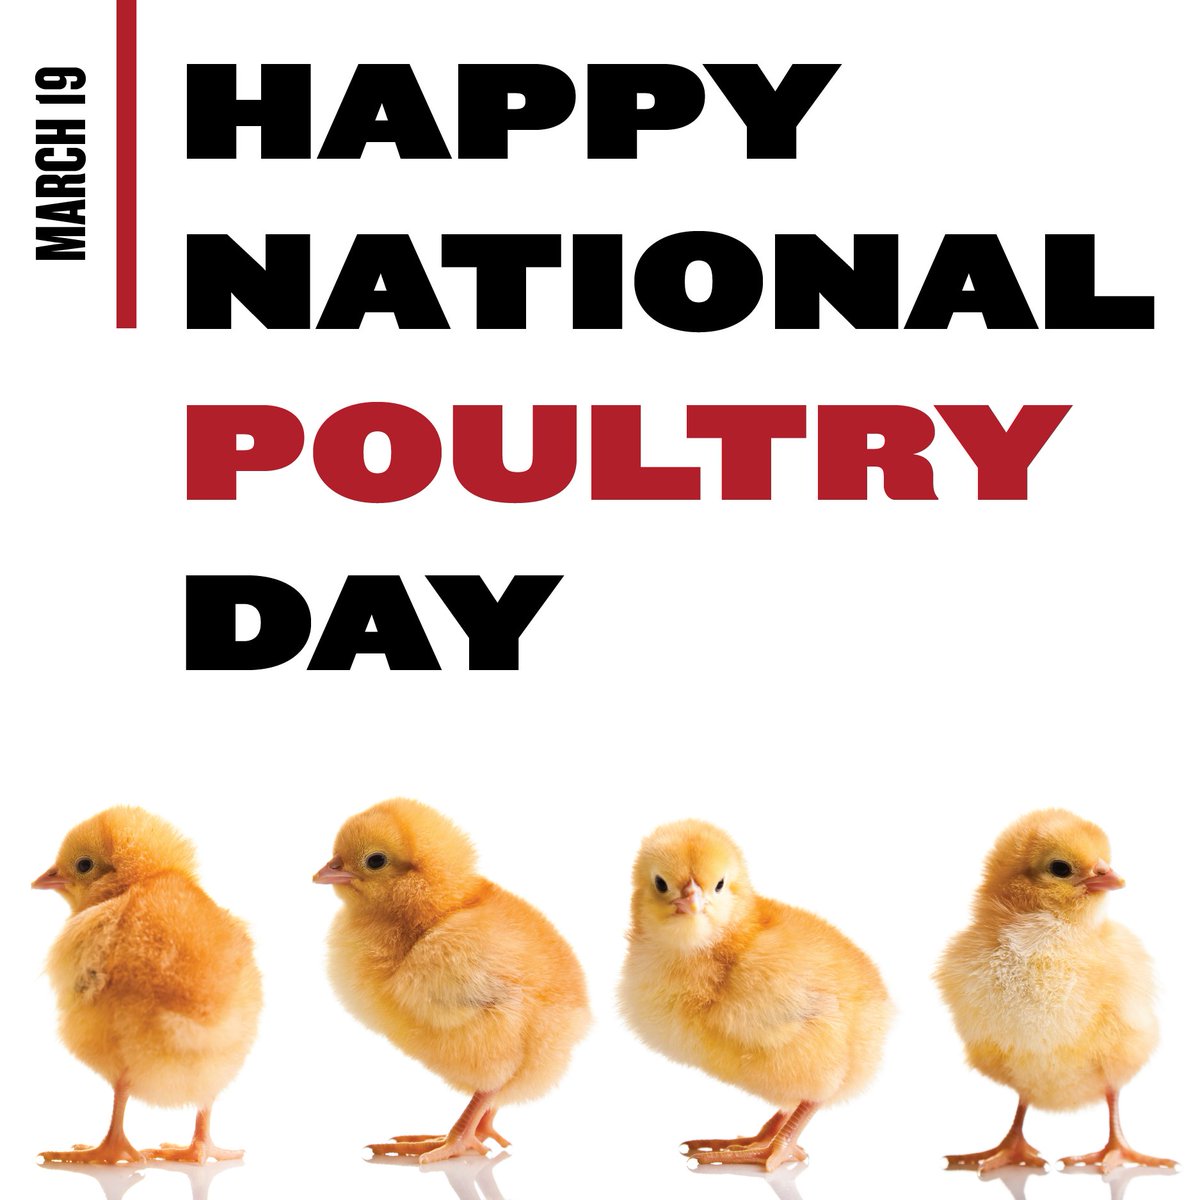 Happy #NationalPoultryDay from Wayne-Sanderson Farms! Join us in taking a moment today to appreciate the hard work of our family farmers and team members who help ensure we all have delicious poultry products on the table. #MakingChickenAmazing